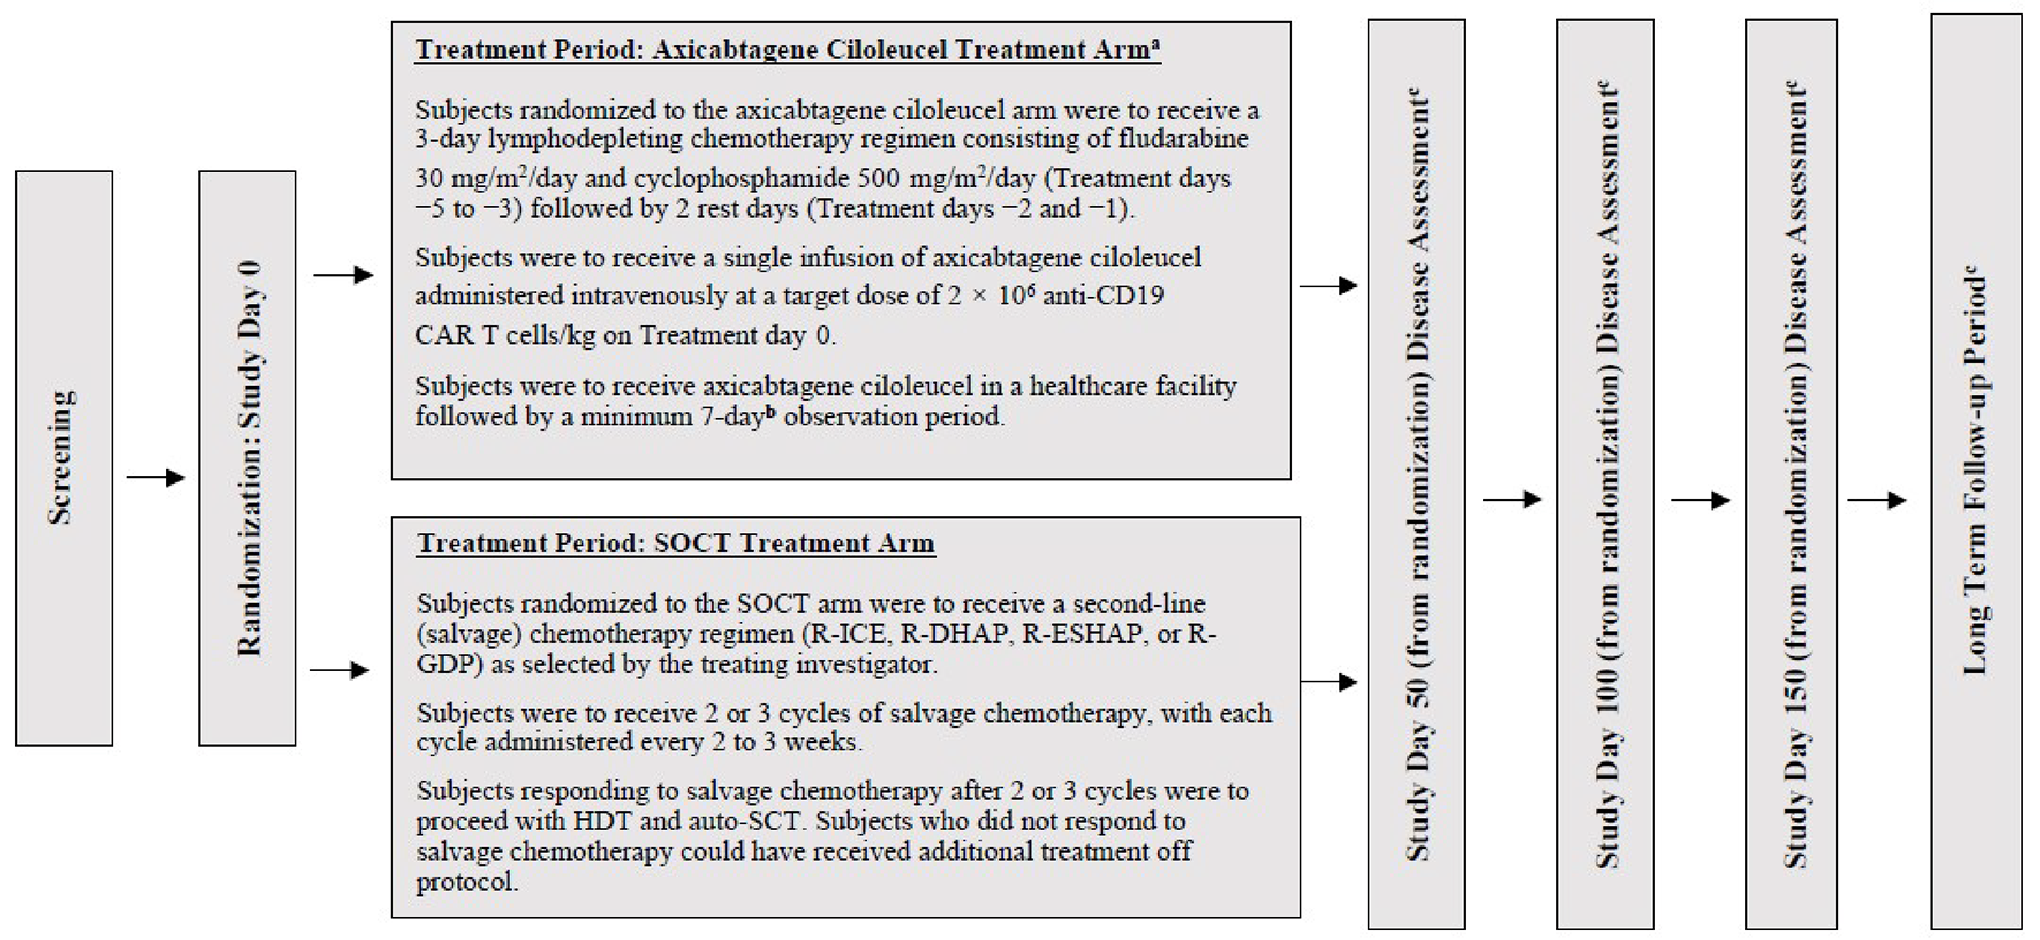 ZUMA-7 Study schema with randomization as study day 0, followed by the treatment period where patients randomized to the axi-cel arm were to receive a 3-day lymphodepleting therapy followed by a single infusion of axi-cel, and patients randomized to the SOC arm were to receive a second-line (salvage) chemotherapy regimen and those responding were to proceed to HDT-ASCT. Disease assessment was performed at study day 50, study day 100, and study day 150 from randomization, followed by long-term follow-up period.